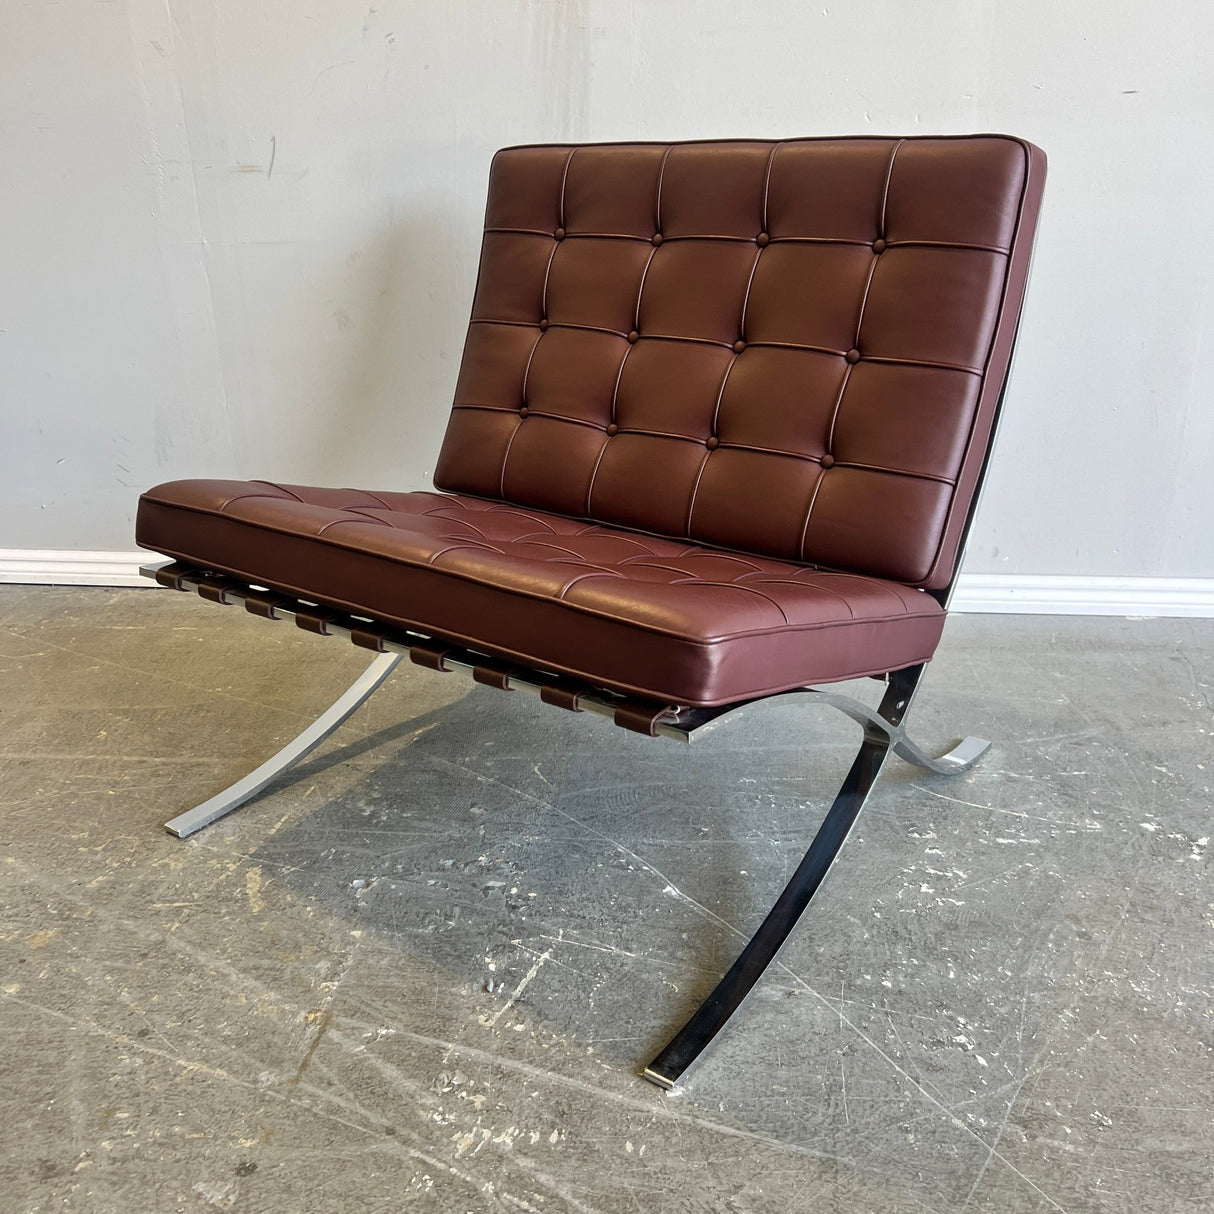 Authentic! Knoll Mies Van Der Rohe iconic Barcelona chair - enliven mart